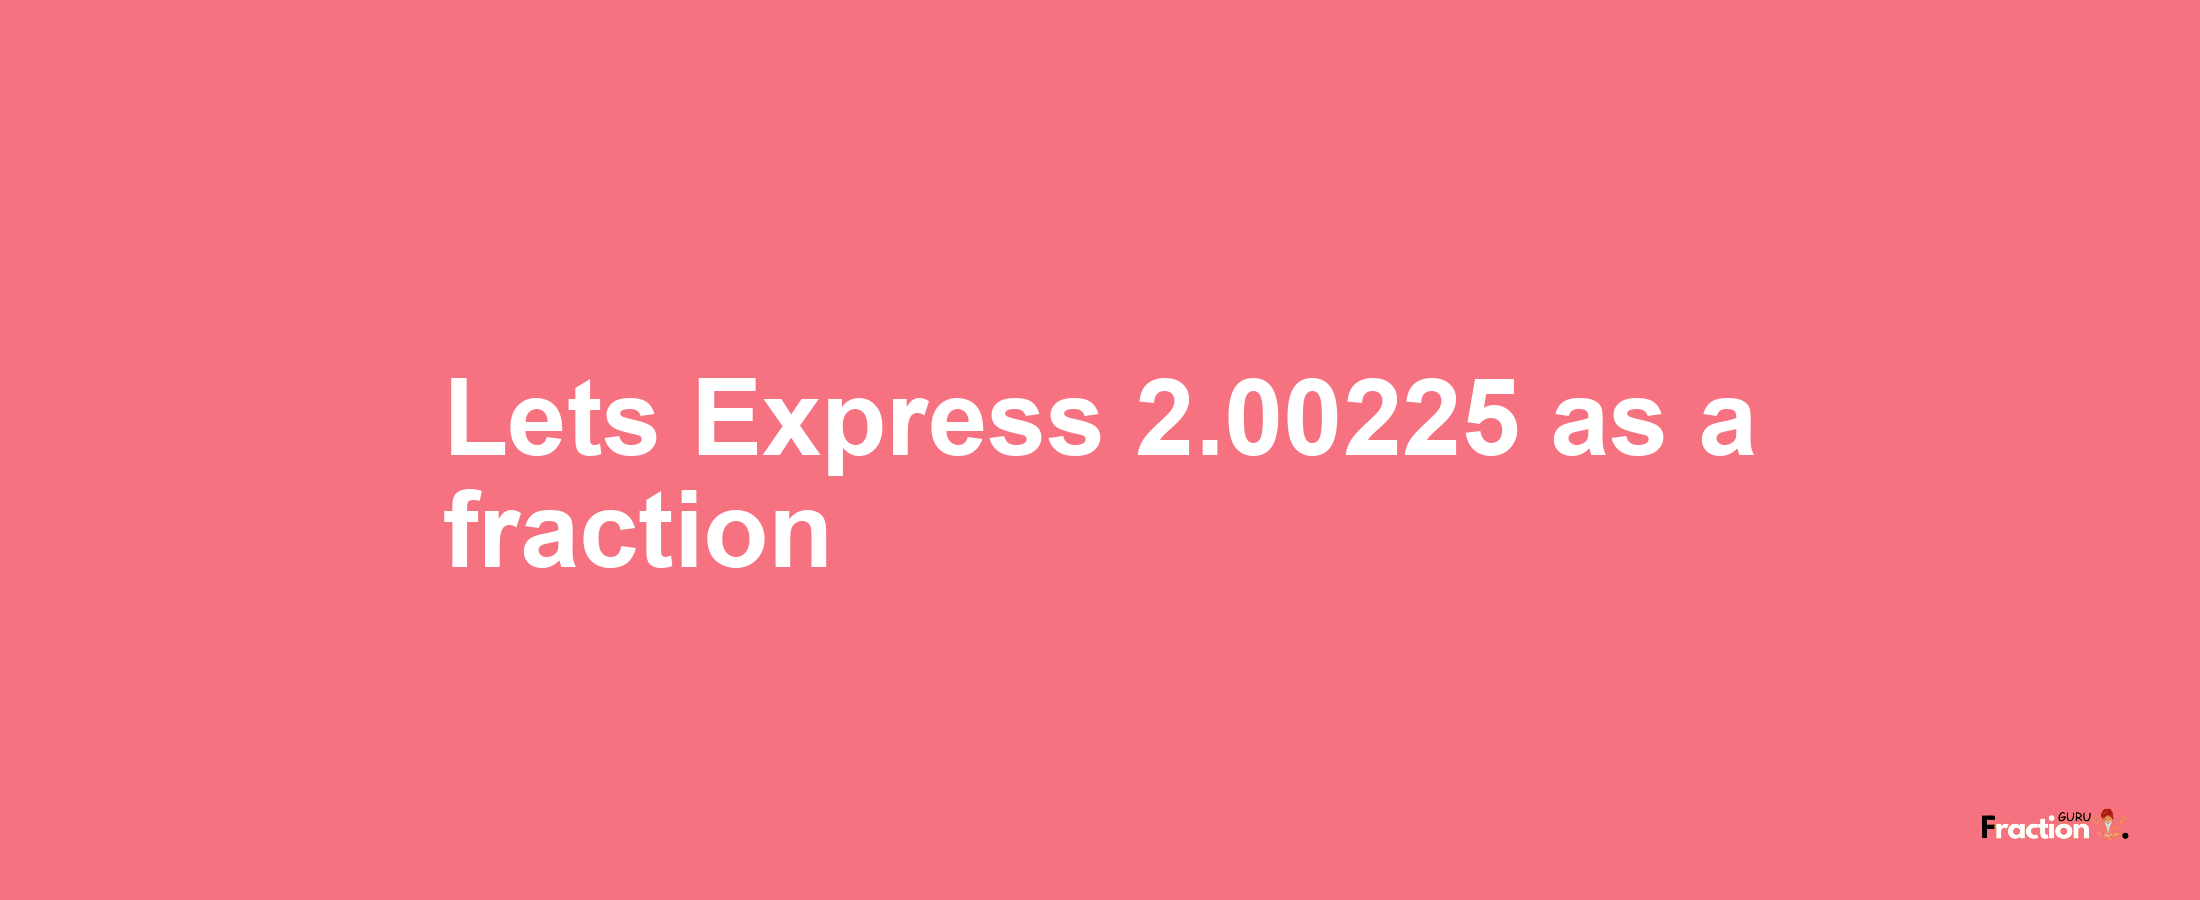 Lets Express 2.00225 as afraction